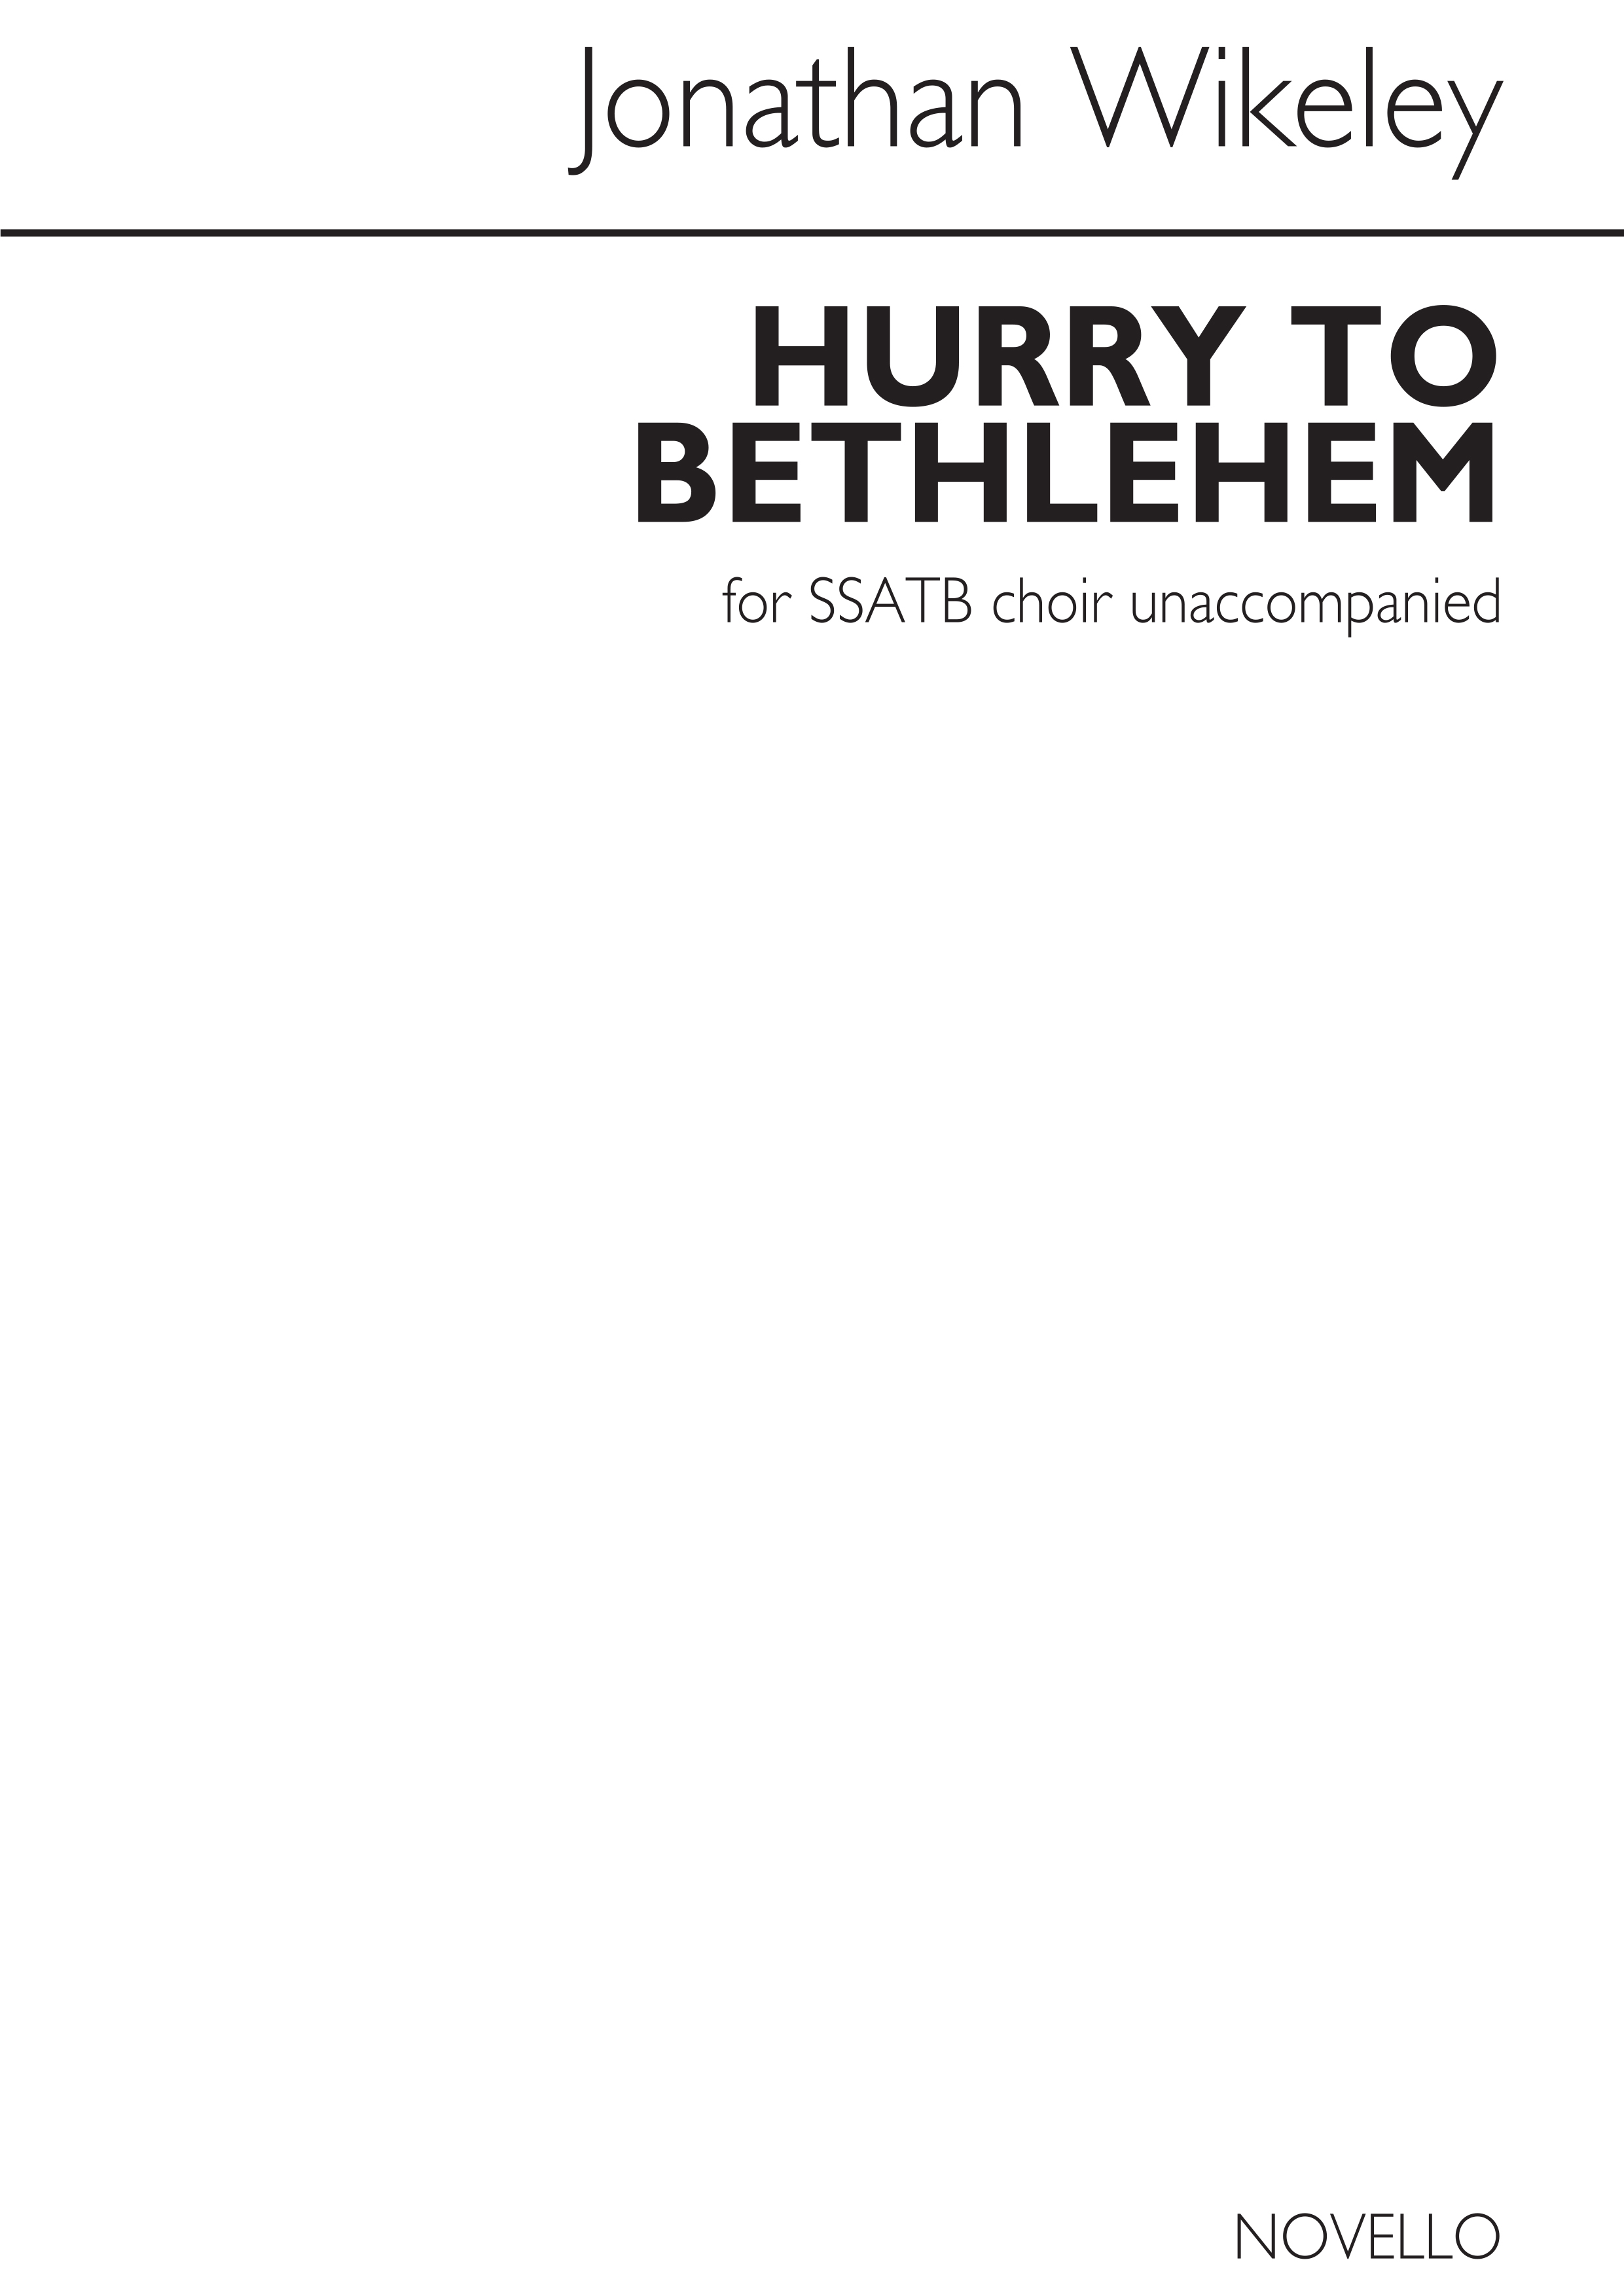 Jonathan Wikeley: Hurry To Bethlehem: SATB: Vocal Score